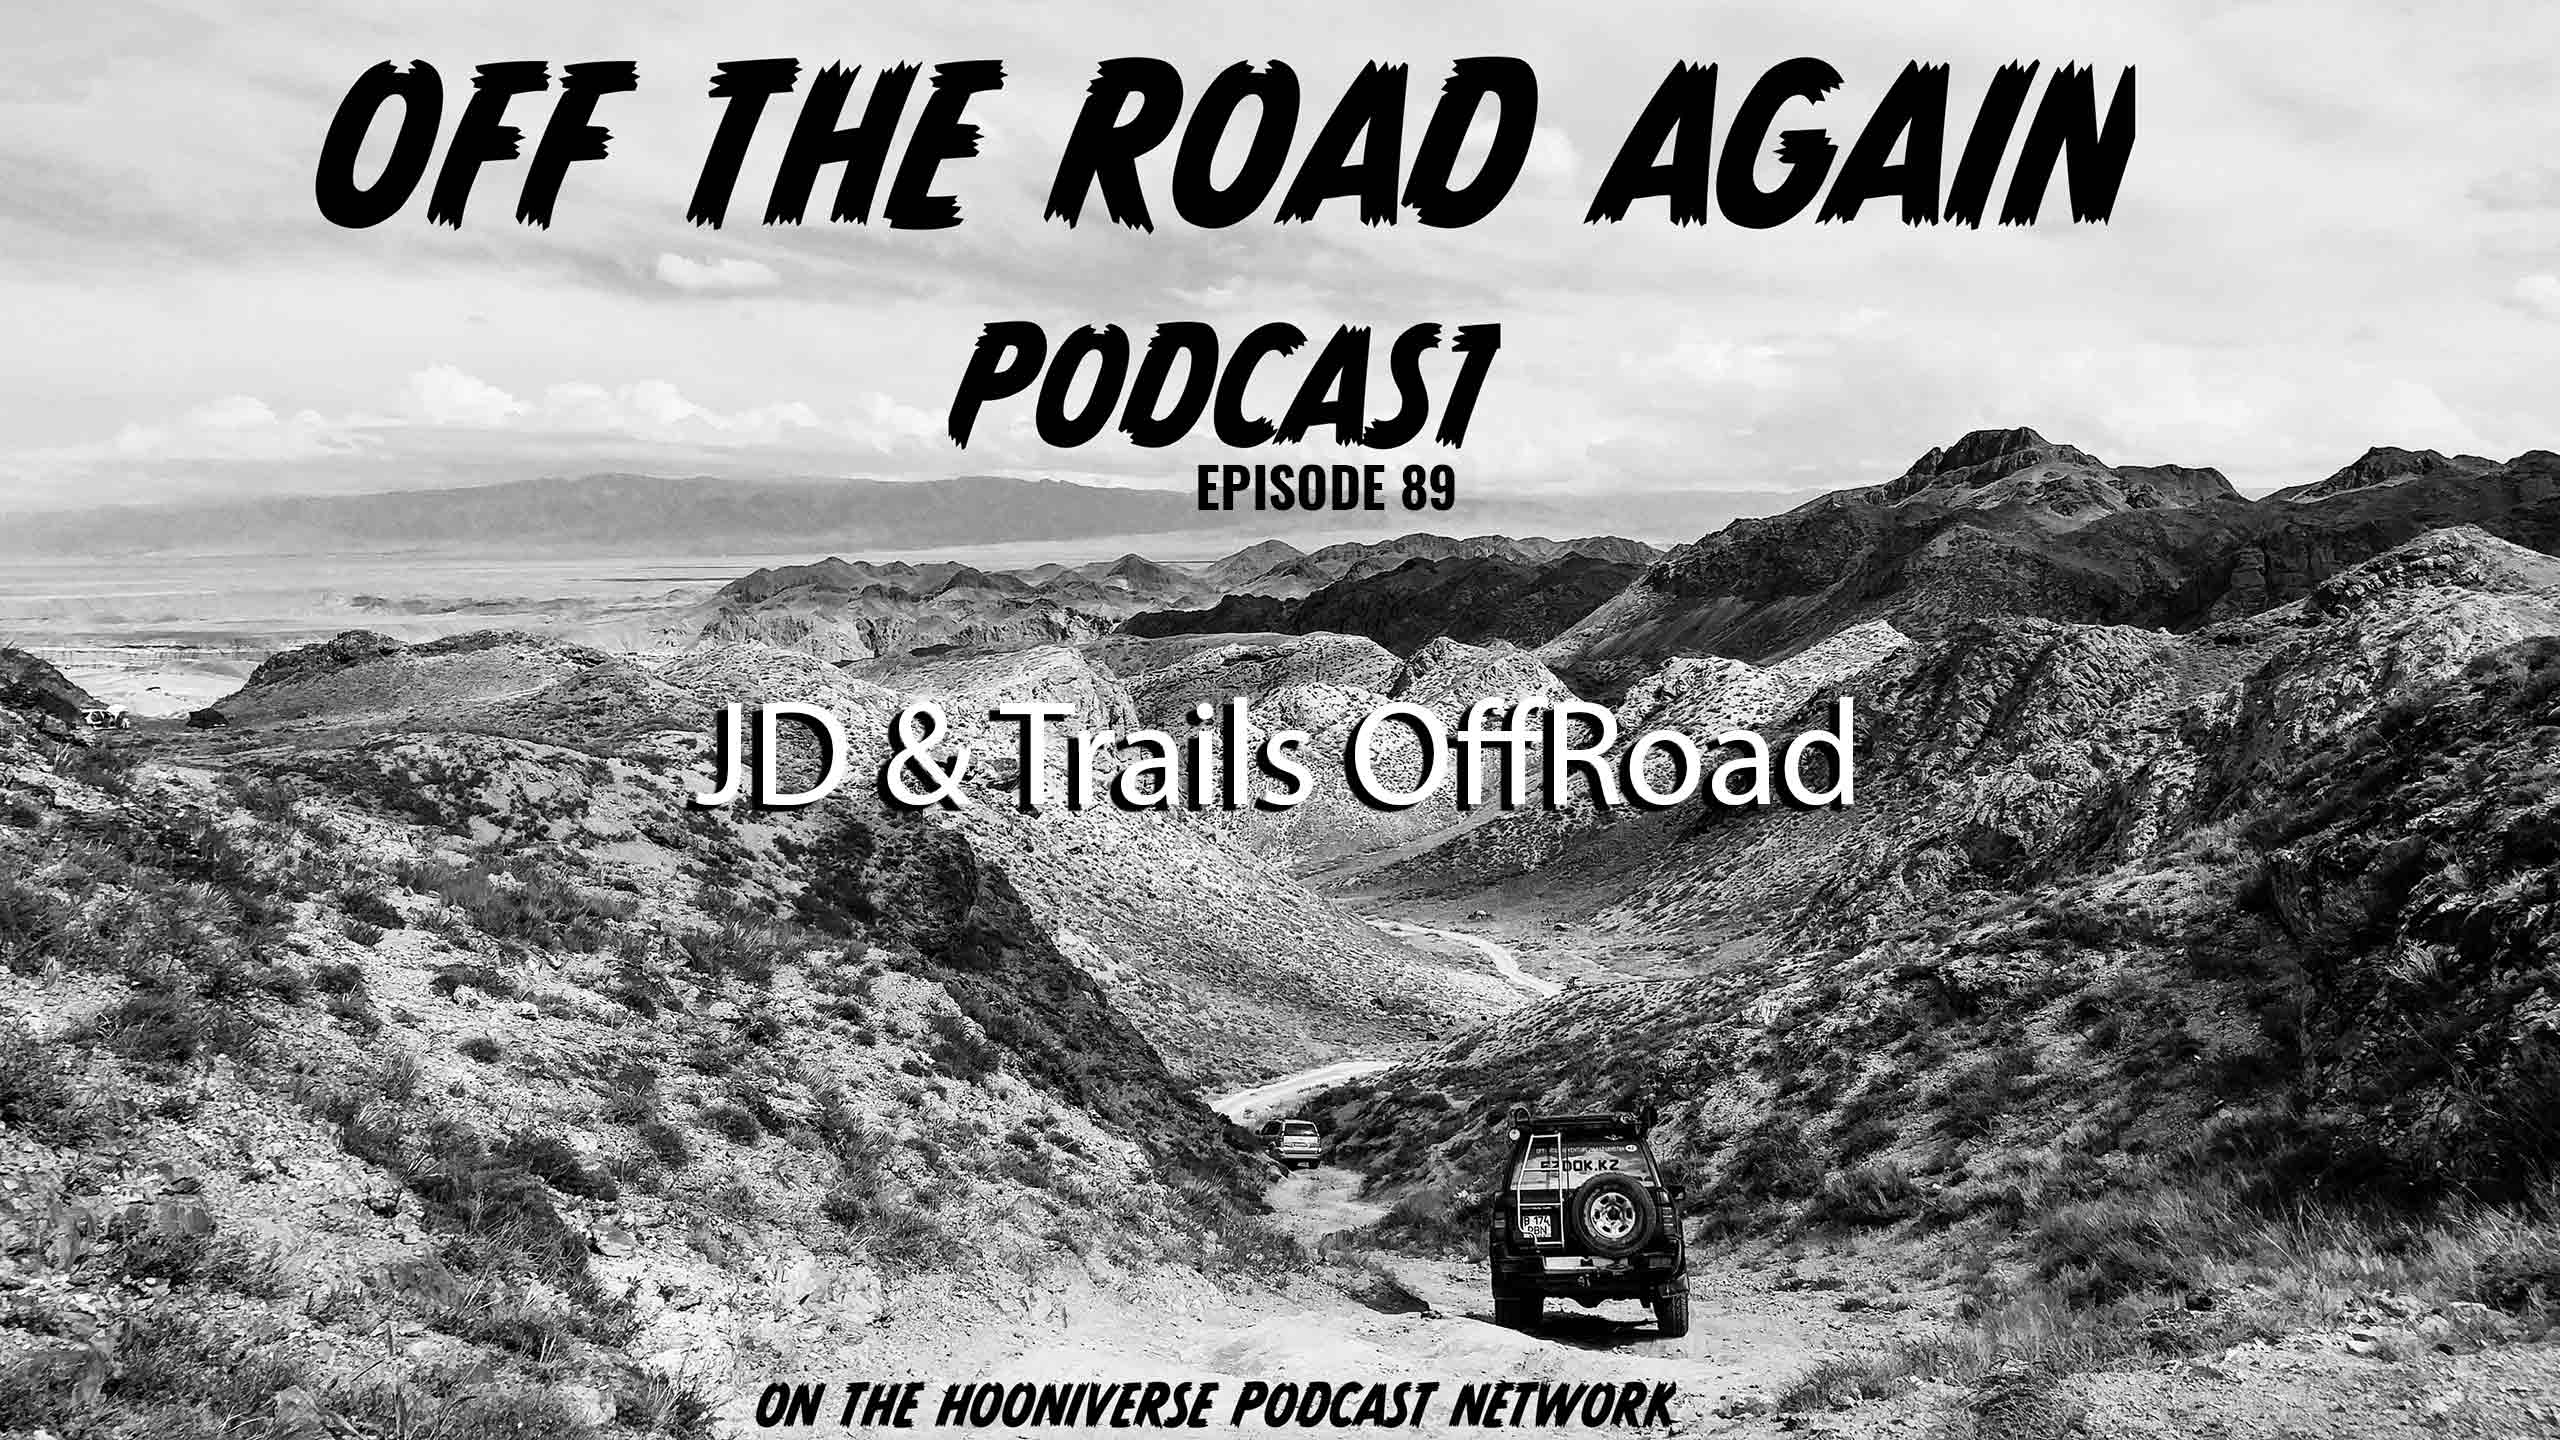 JD-Trails-OffRoad-Off-The-Road-Again-Podcast-Episode-89